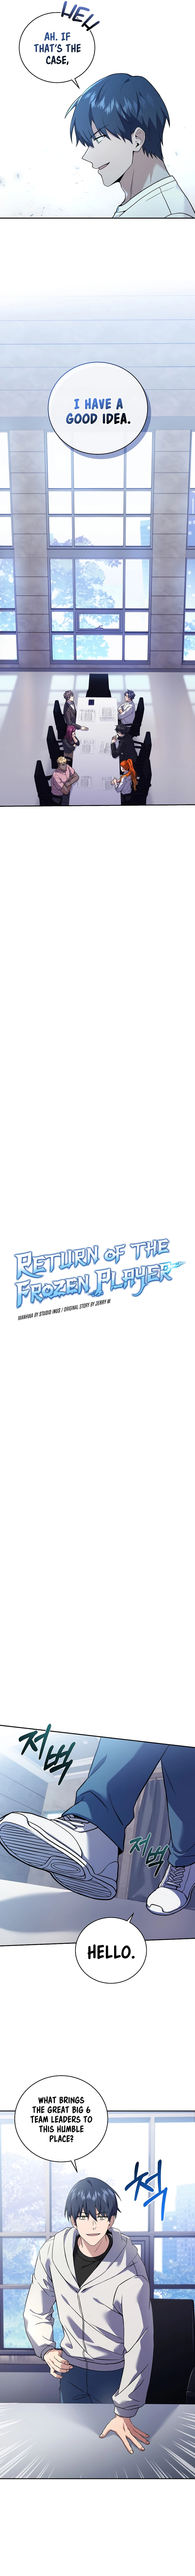 Return of the Frozen Player image